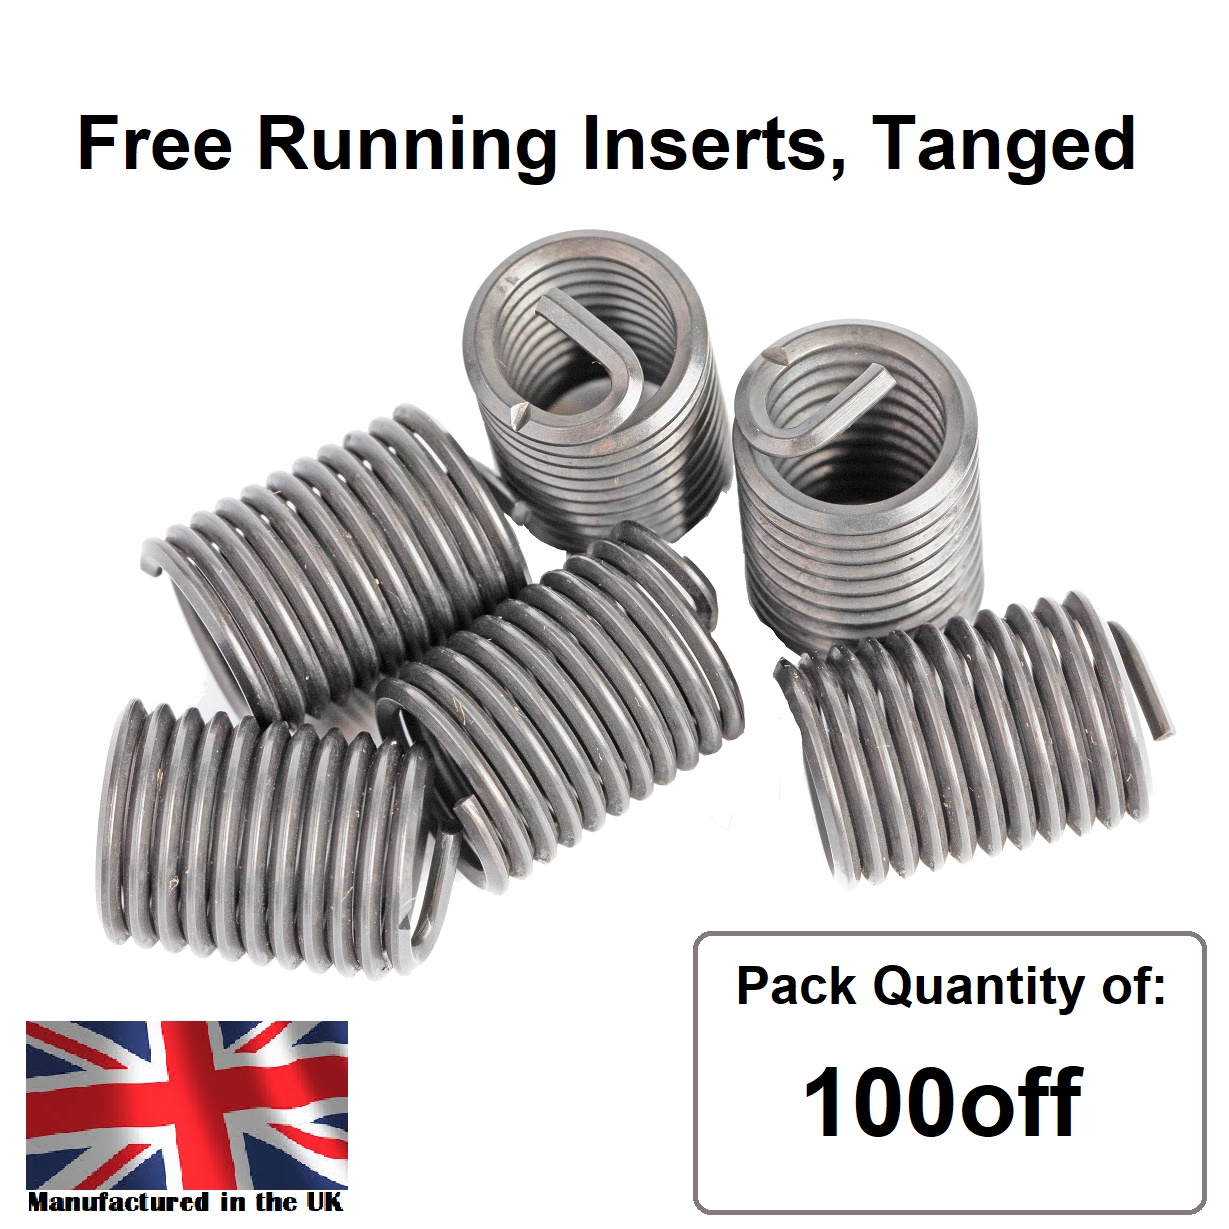 M2.5 x 0.45 x 1D Metric Coarse, Free Running, Tanged, Wire Thread Repair Insert, 304/A2 Stainless (Pack 100)